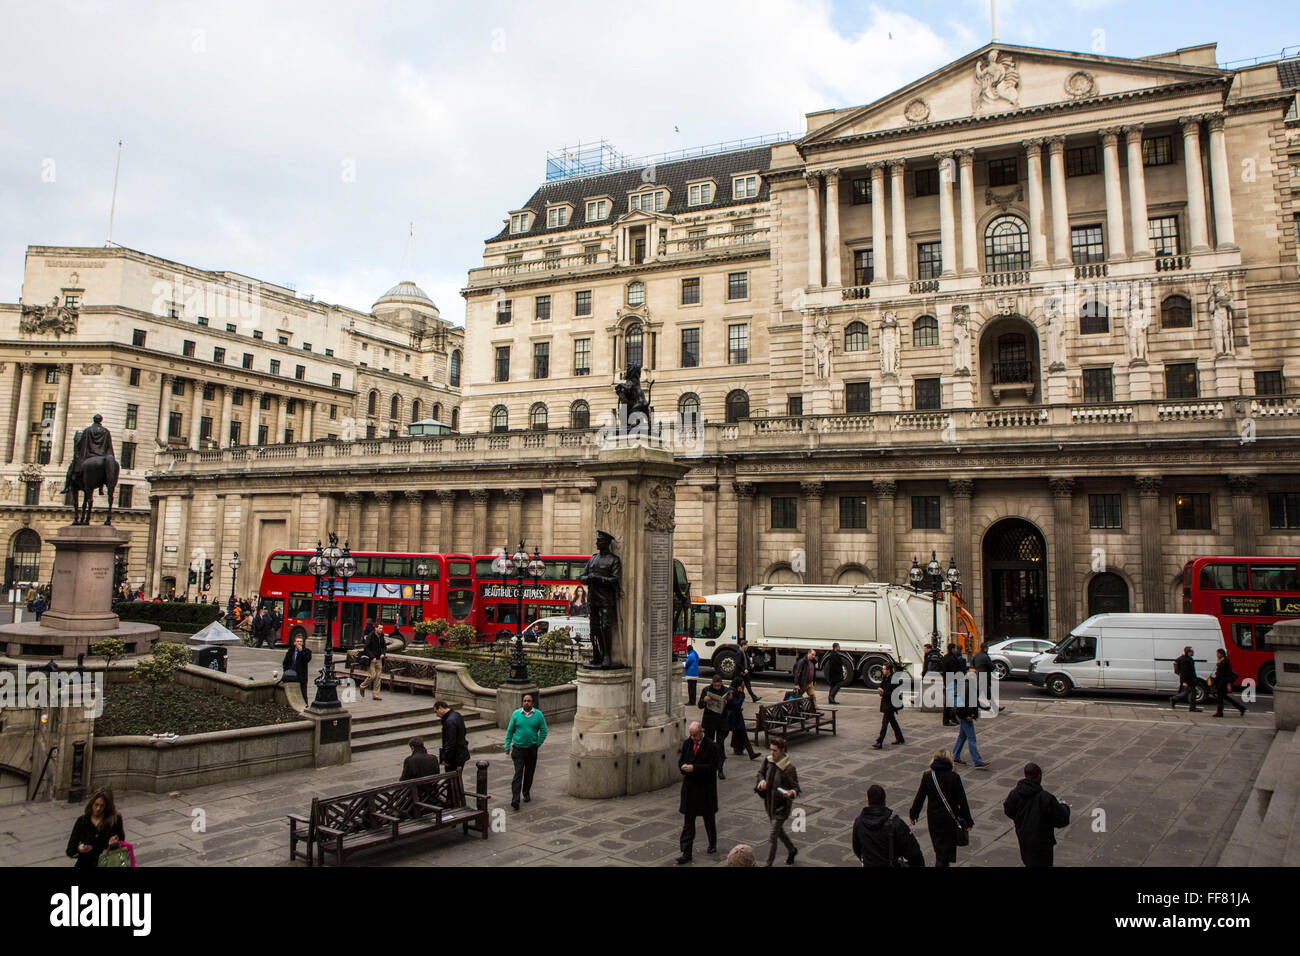 A London street view of the Bank of England, Threadneedle Street, London, United Kingdom.  The Bank of England is the central bank of the United Kingdom.  It was established in 1694 and is the second oldest central bank in the world.  The Bank’s headquarters have been in London’s main financial district, the City of London since 1734 and it is sometimes know as The Old Lady of Threadneedle Street and is an iconic image of London and monetary policy. Stock Photo